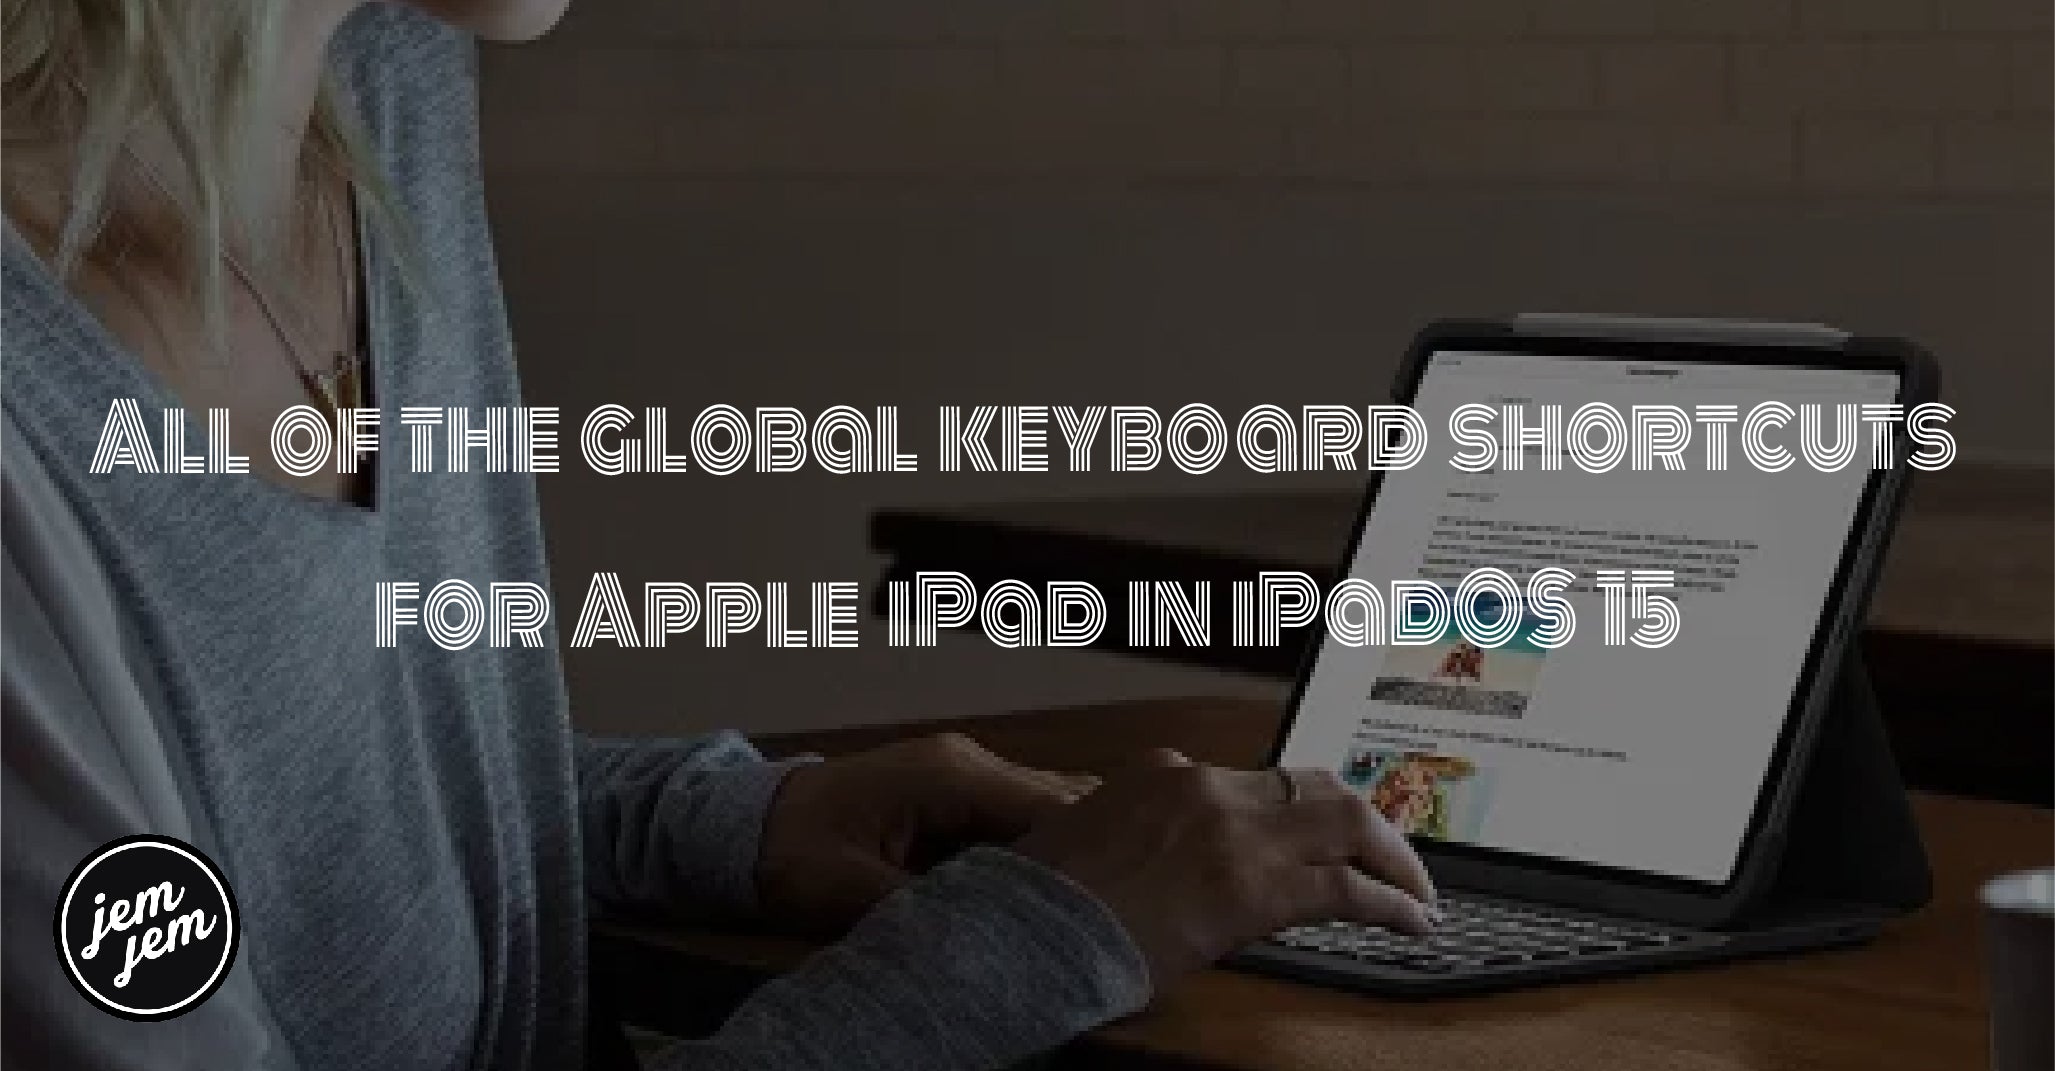 All of the global keyboard shortcuts  for Apple iPad in iPadOS 15